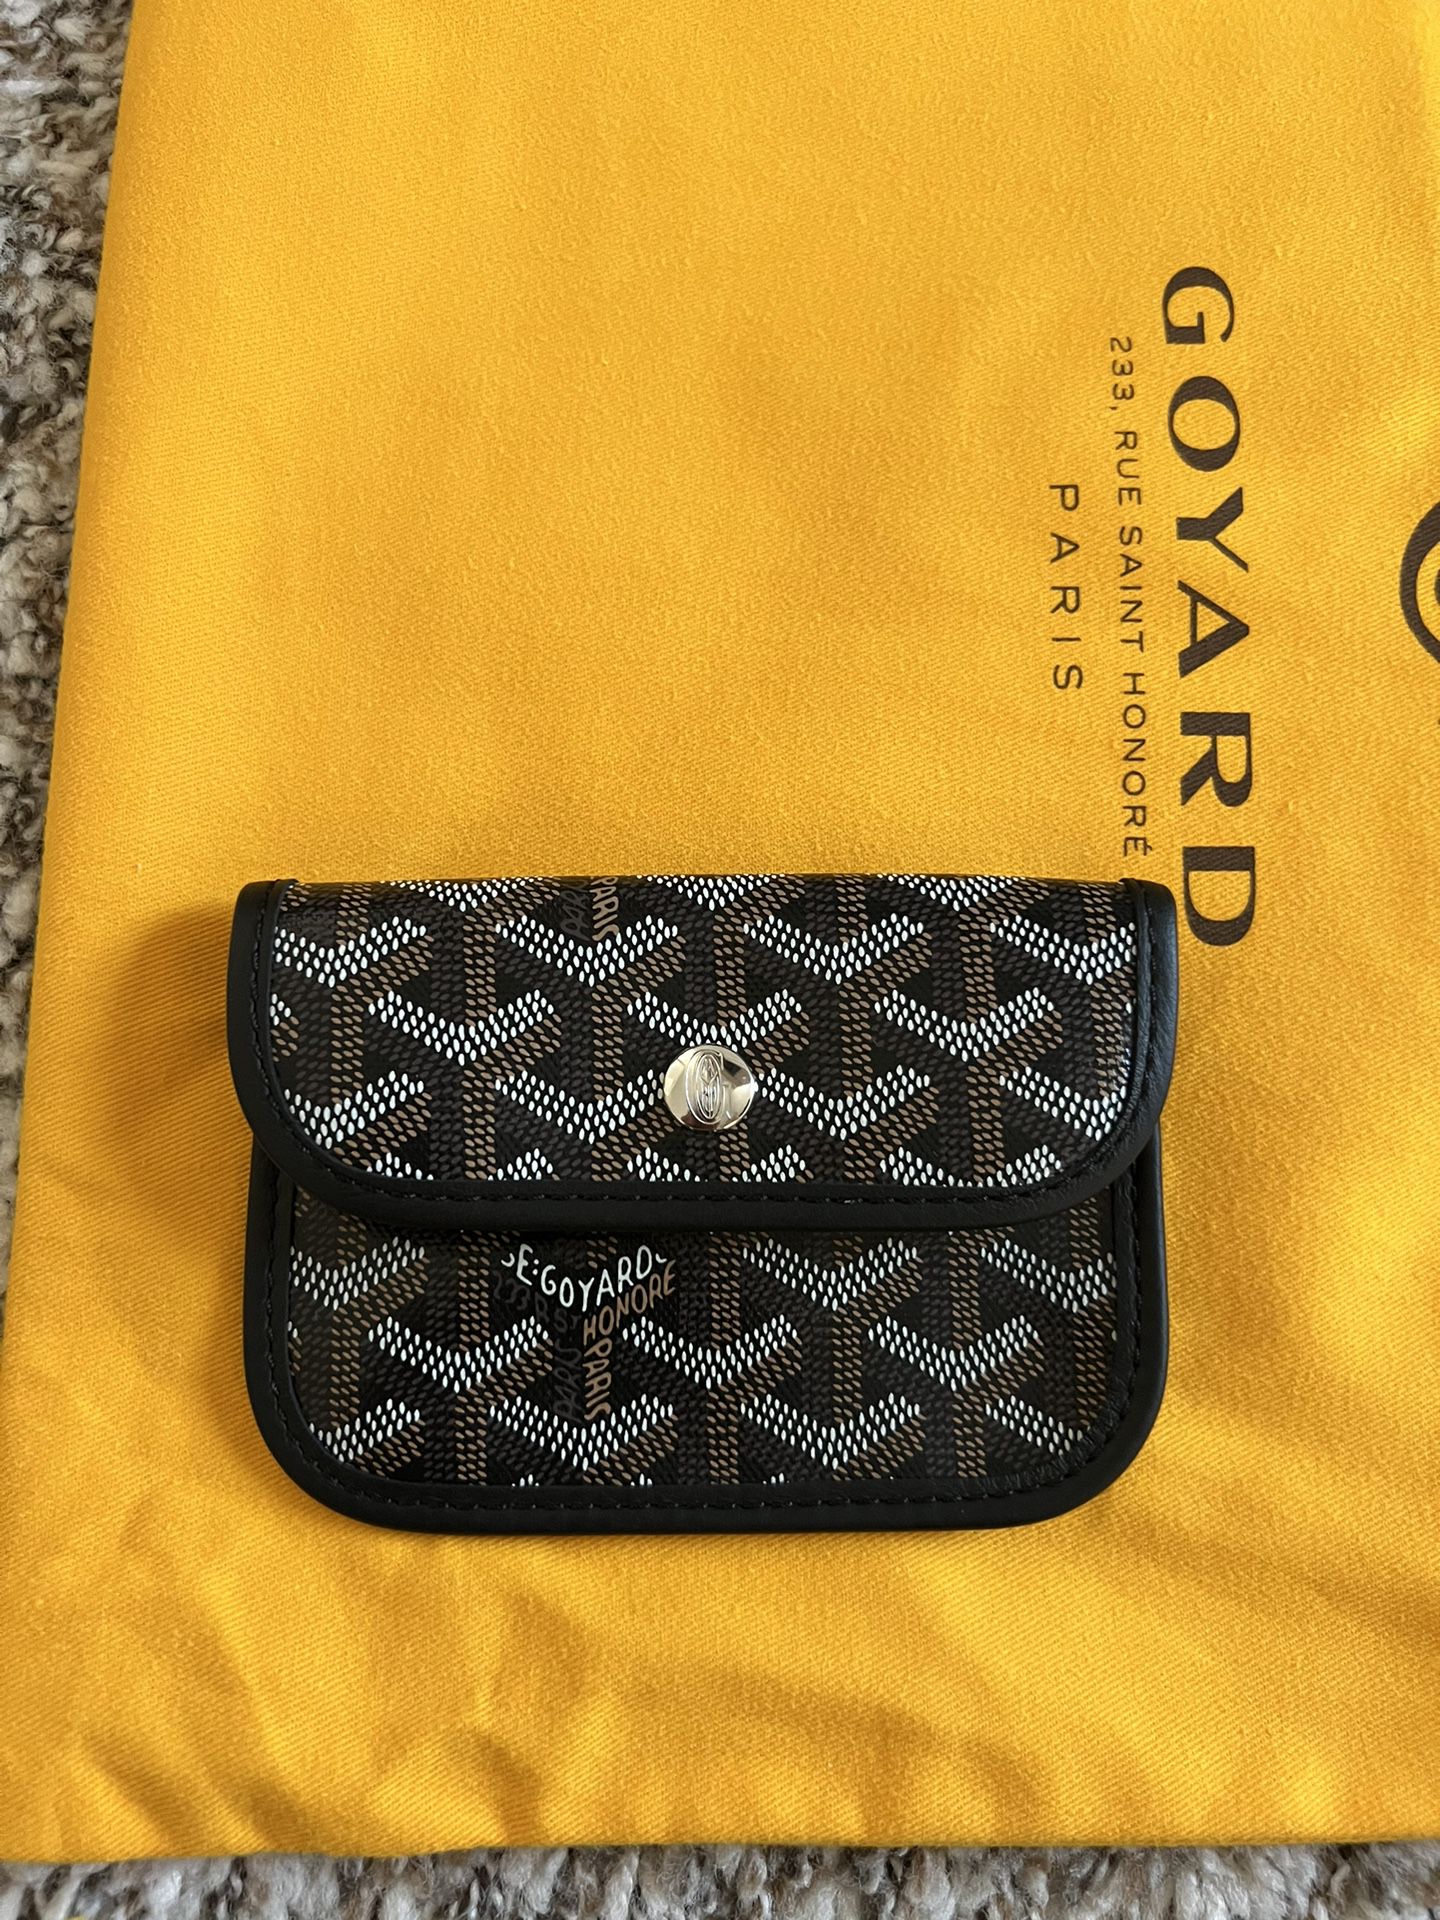 NEW AUTHENTIC GOYARD SMALL POUCH WITH RECEIPT 